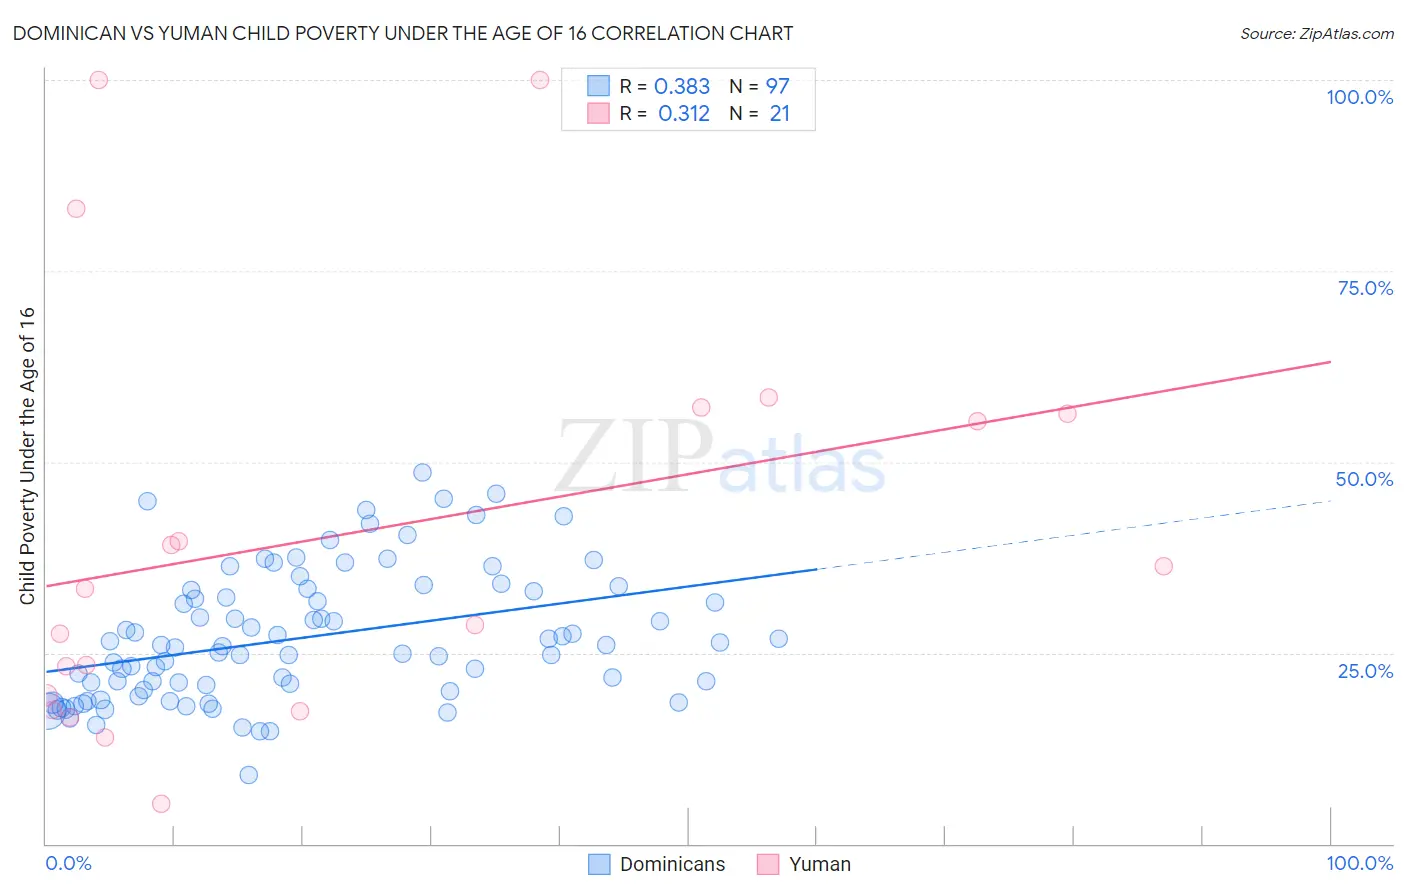 Dominican vs Yuman Child Poverty Under the Age of 16